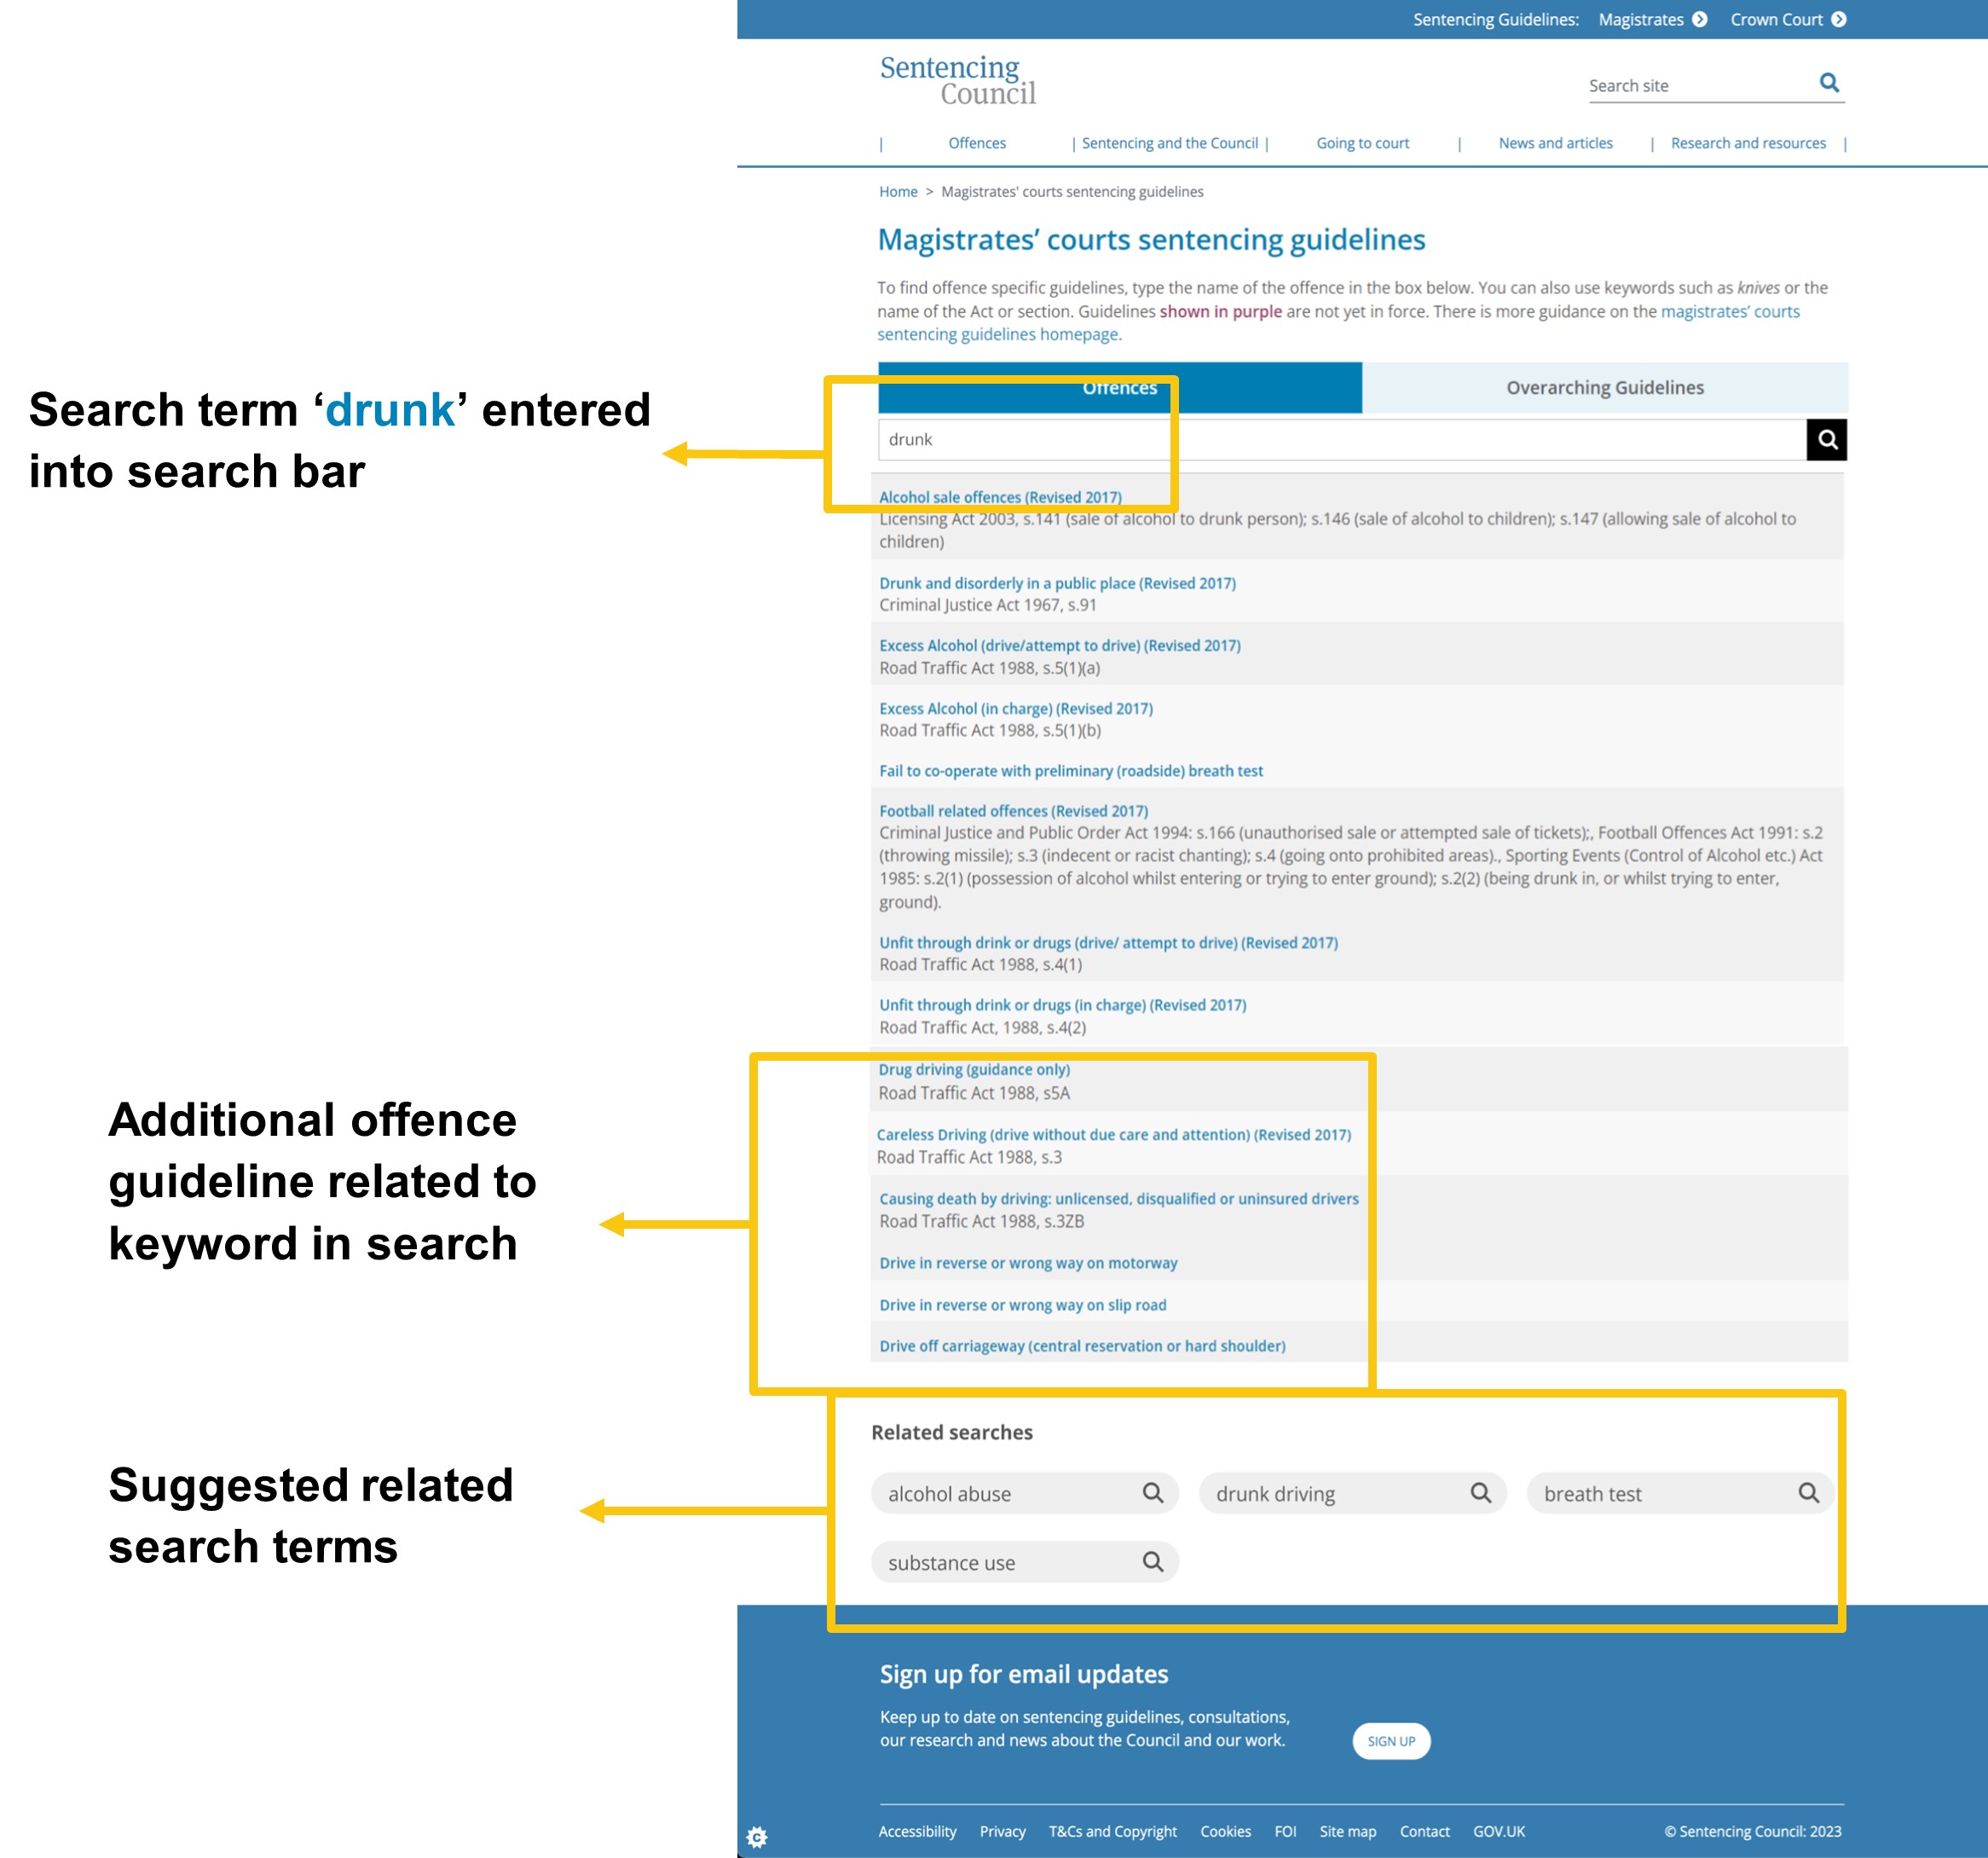 Image showing a mock-up of recommendation A1. The search term "drunk" entered in the guideline search bar returns additional guideline related to the keyword, as well as suggested related search terms